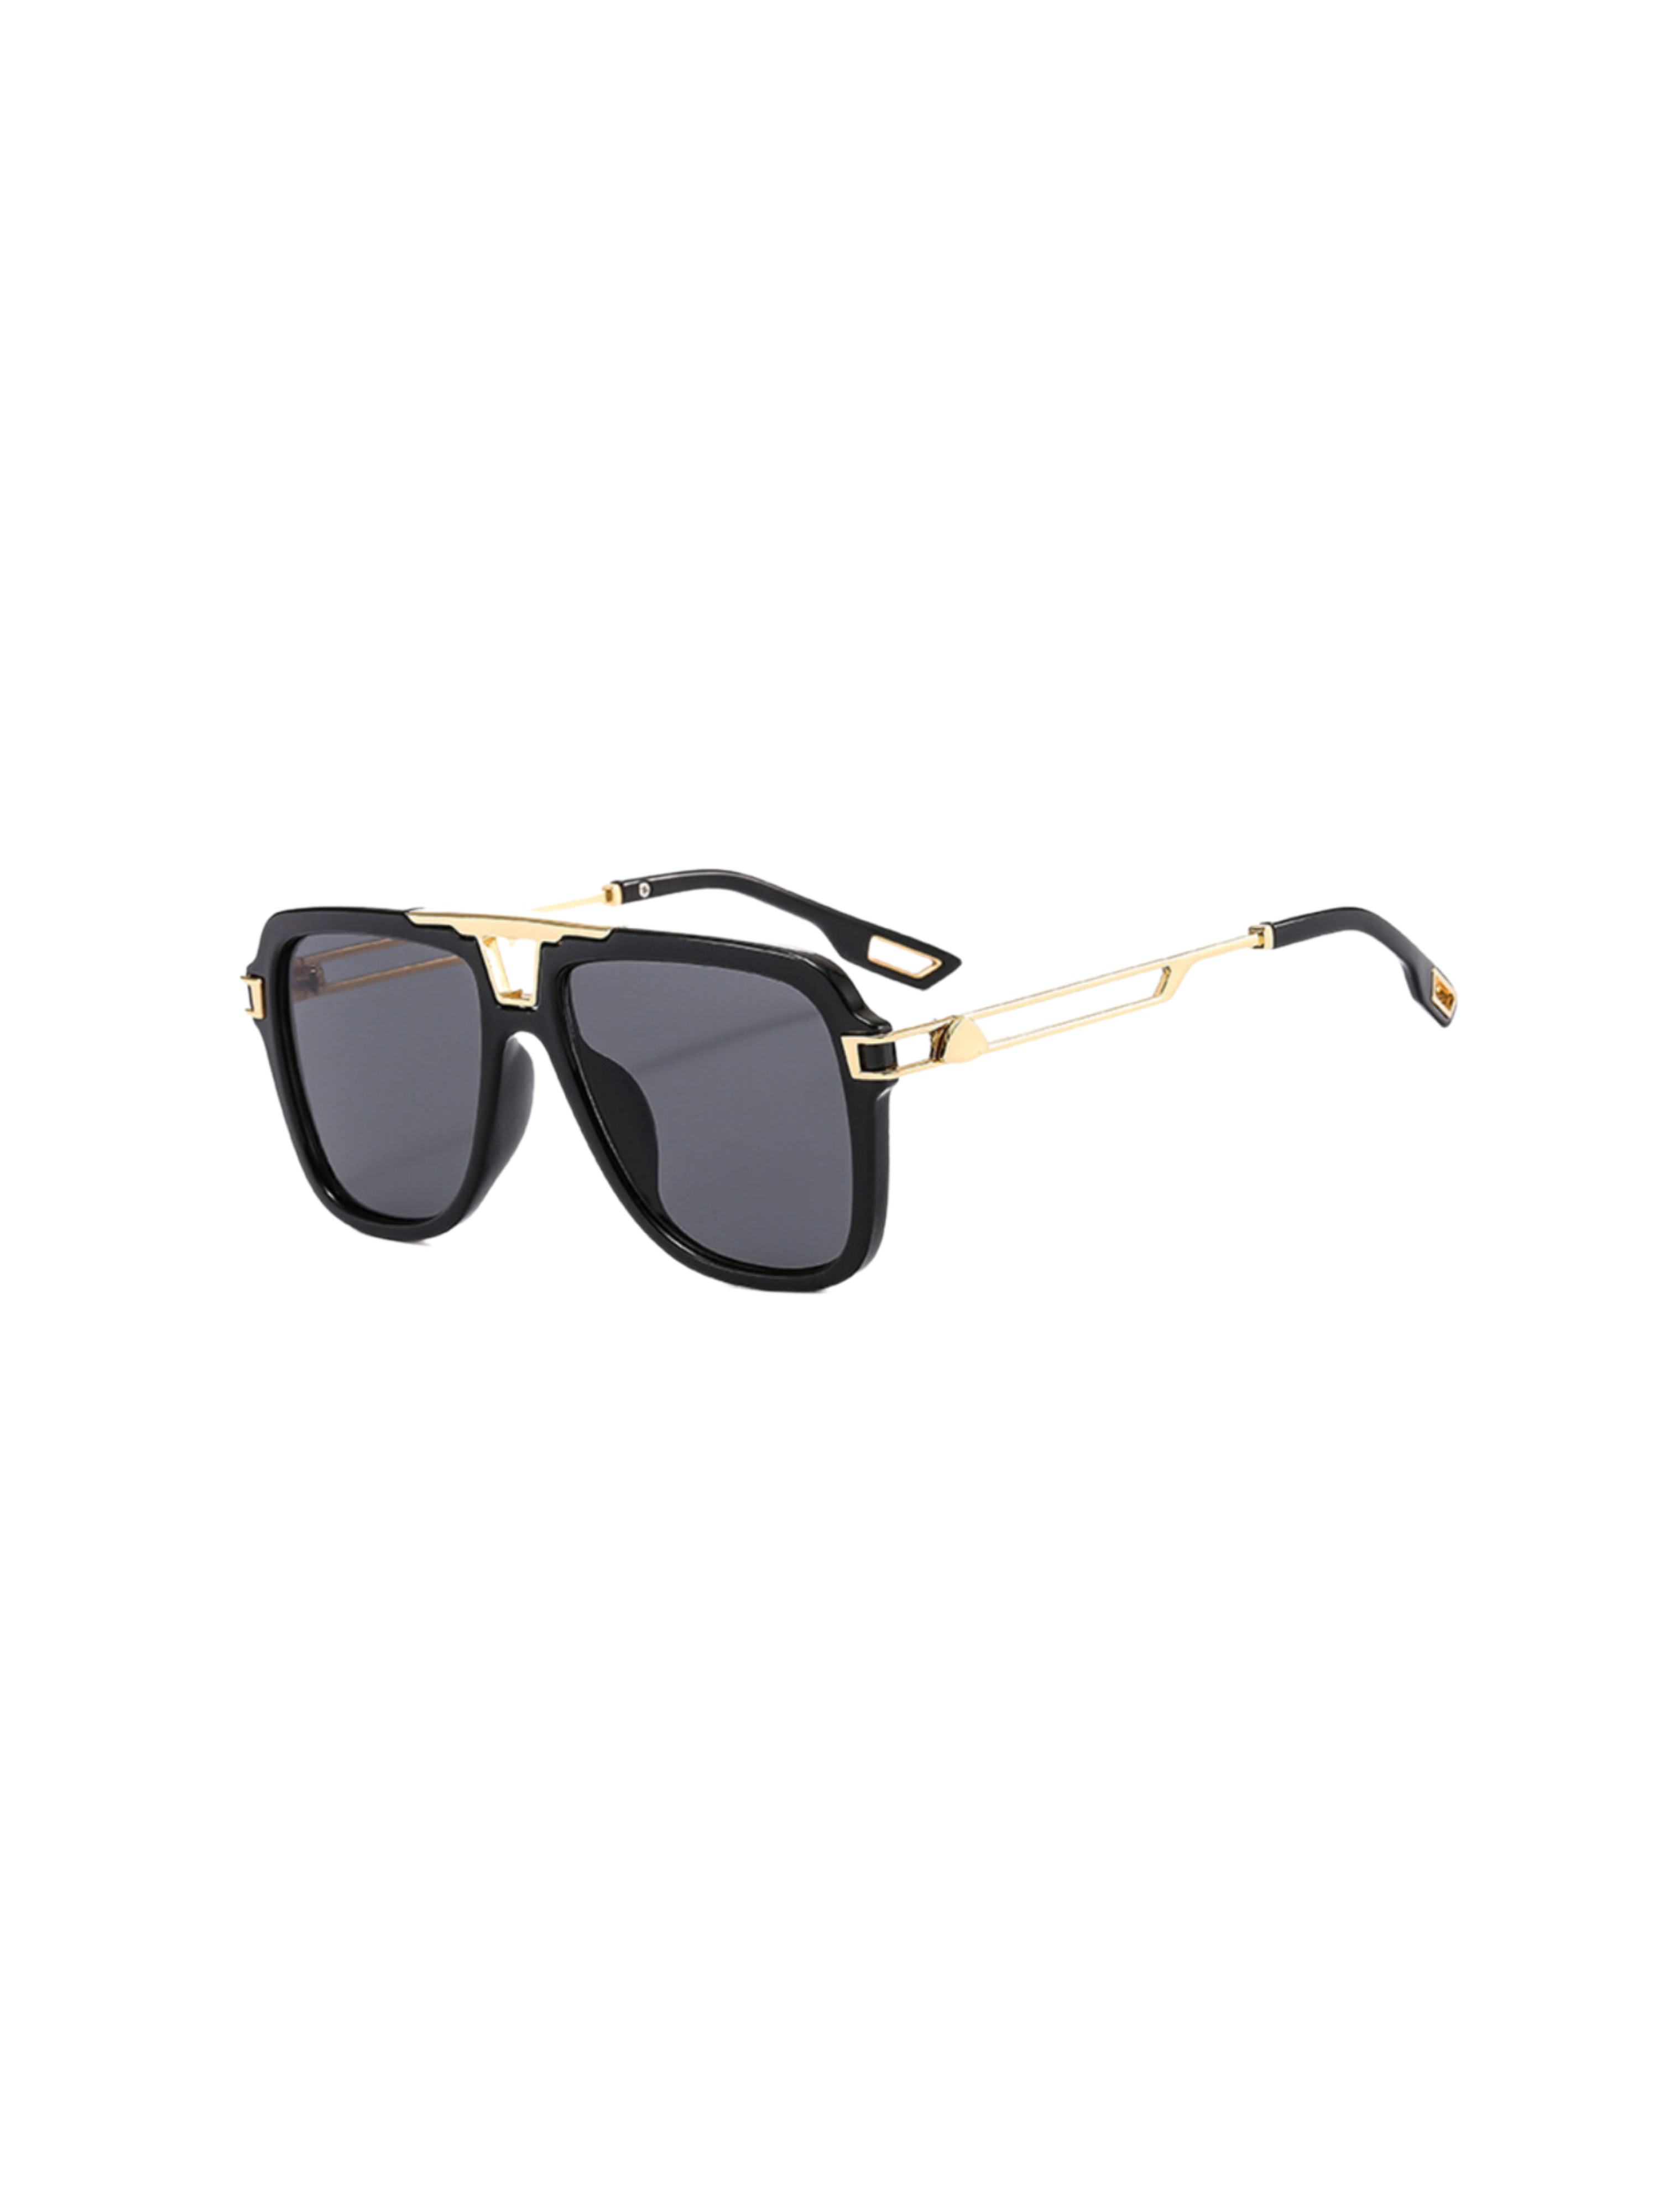 GOLDxTEAL black rounded sunglasses with gold tone metal accents.